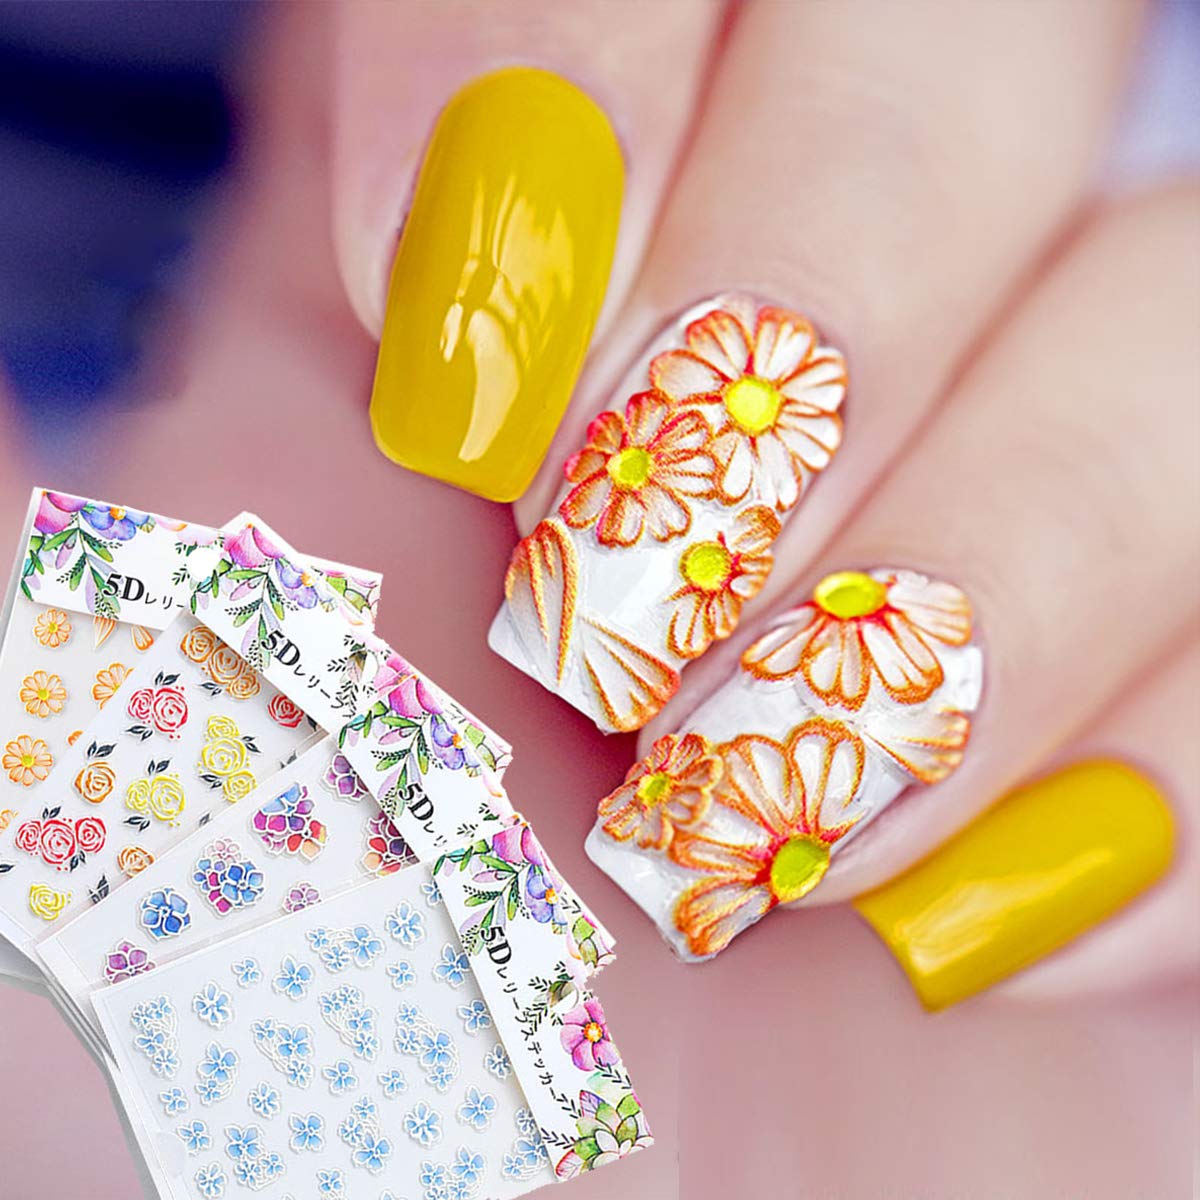 1 Sheet 5D Embossed Flowers Nail Stickers With Textured 3D Self